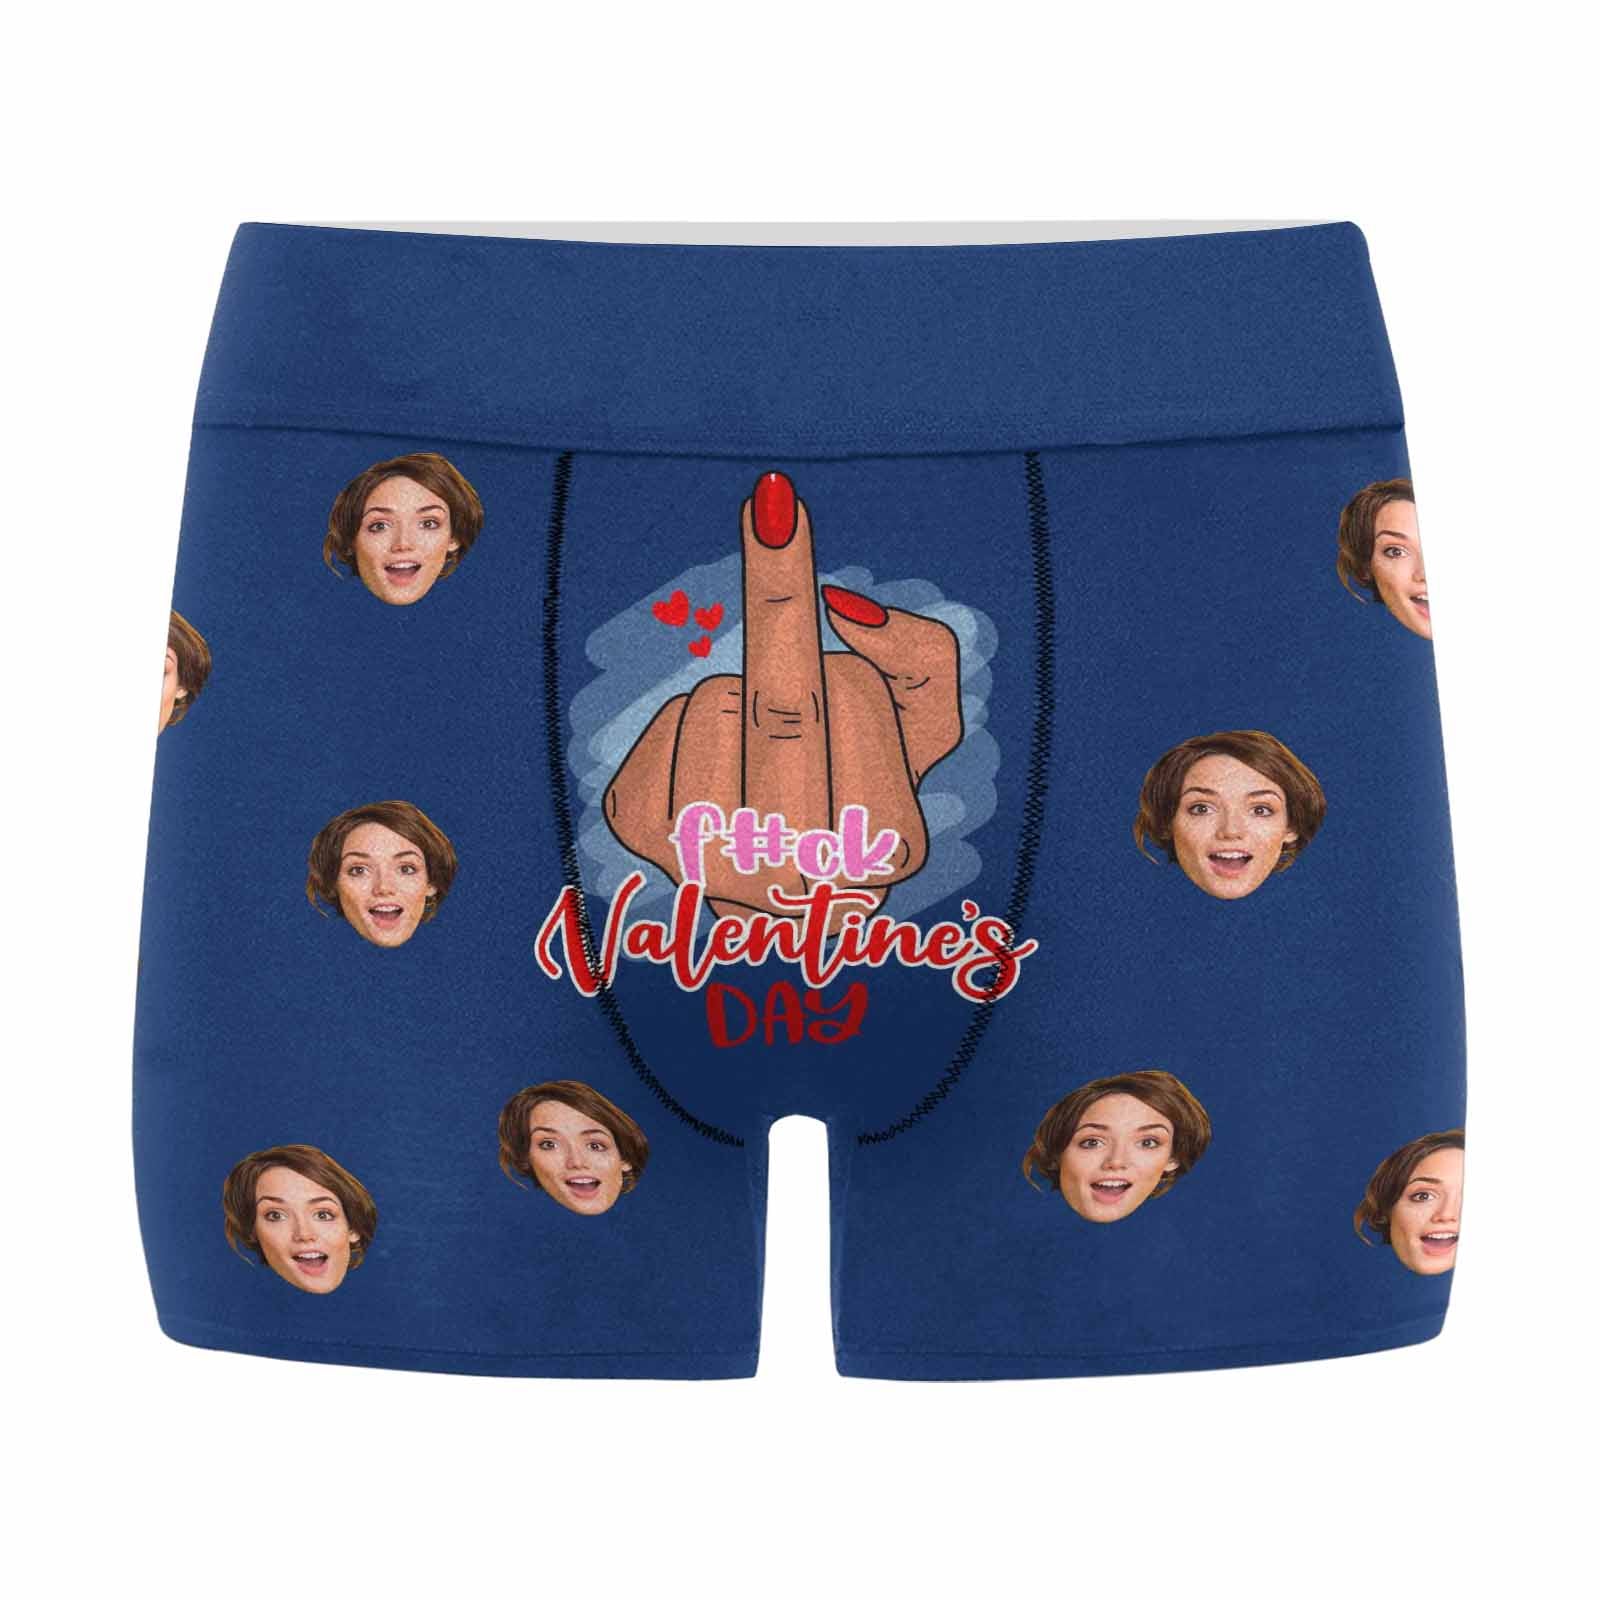 Custom Boxers with Photo/Text/Name Men's Funny Personalized Briefs Cotton  Underwear Stretchy Boxer Shorts Novelty Gift for Boyfr